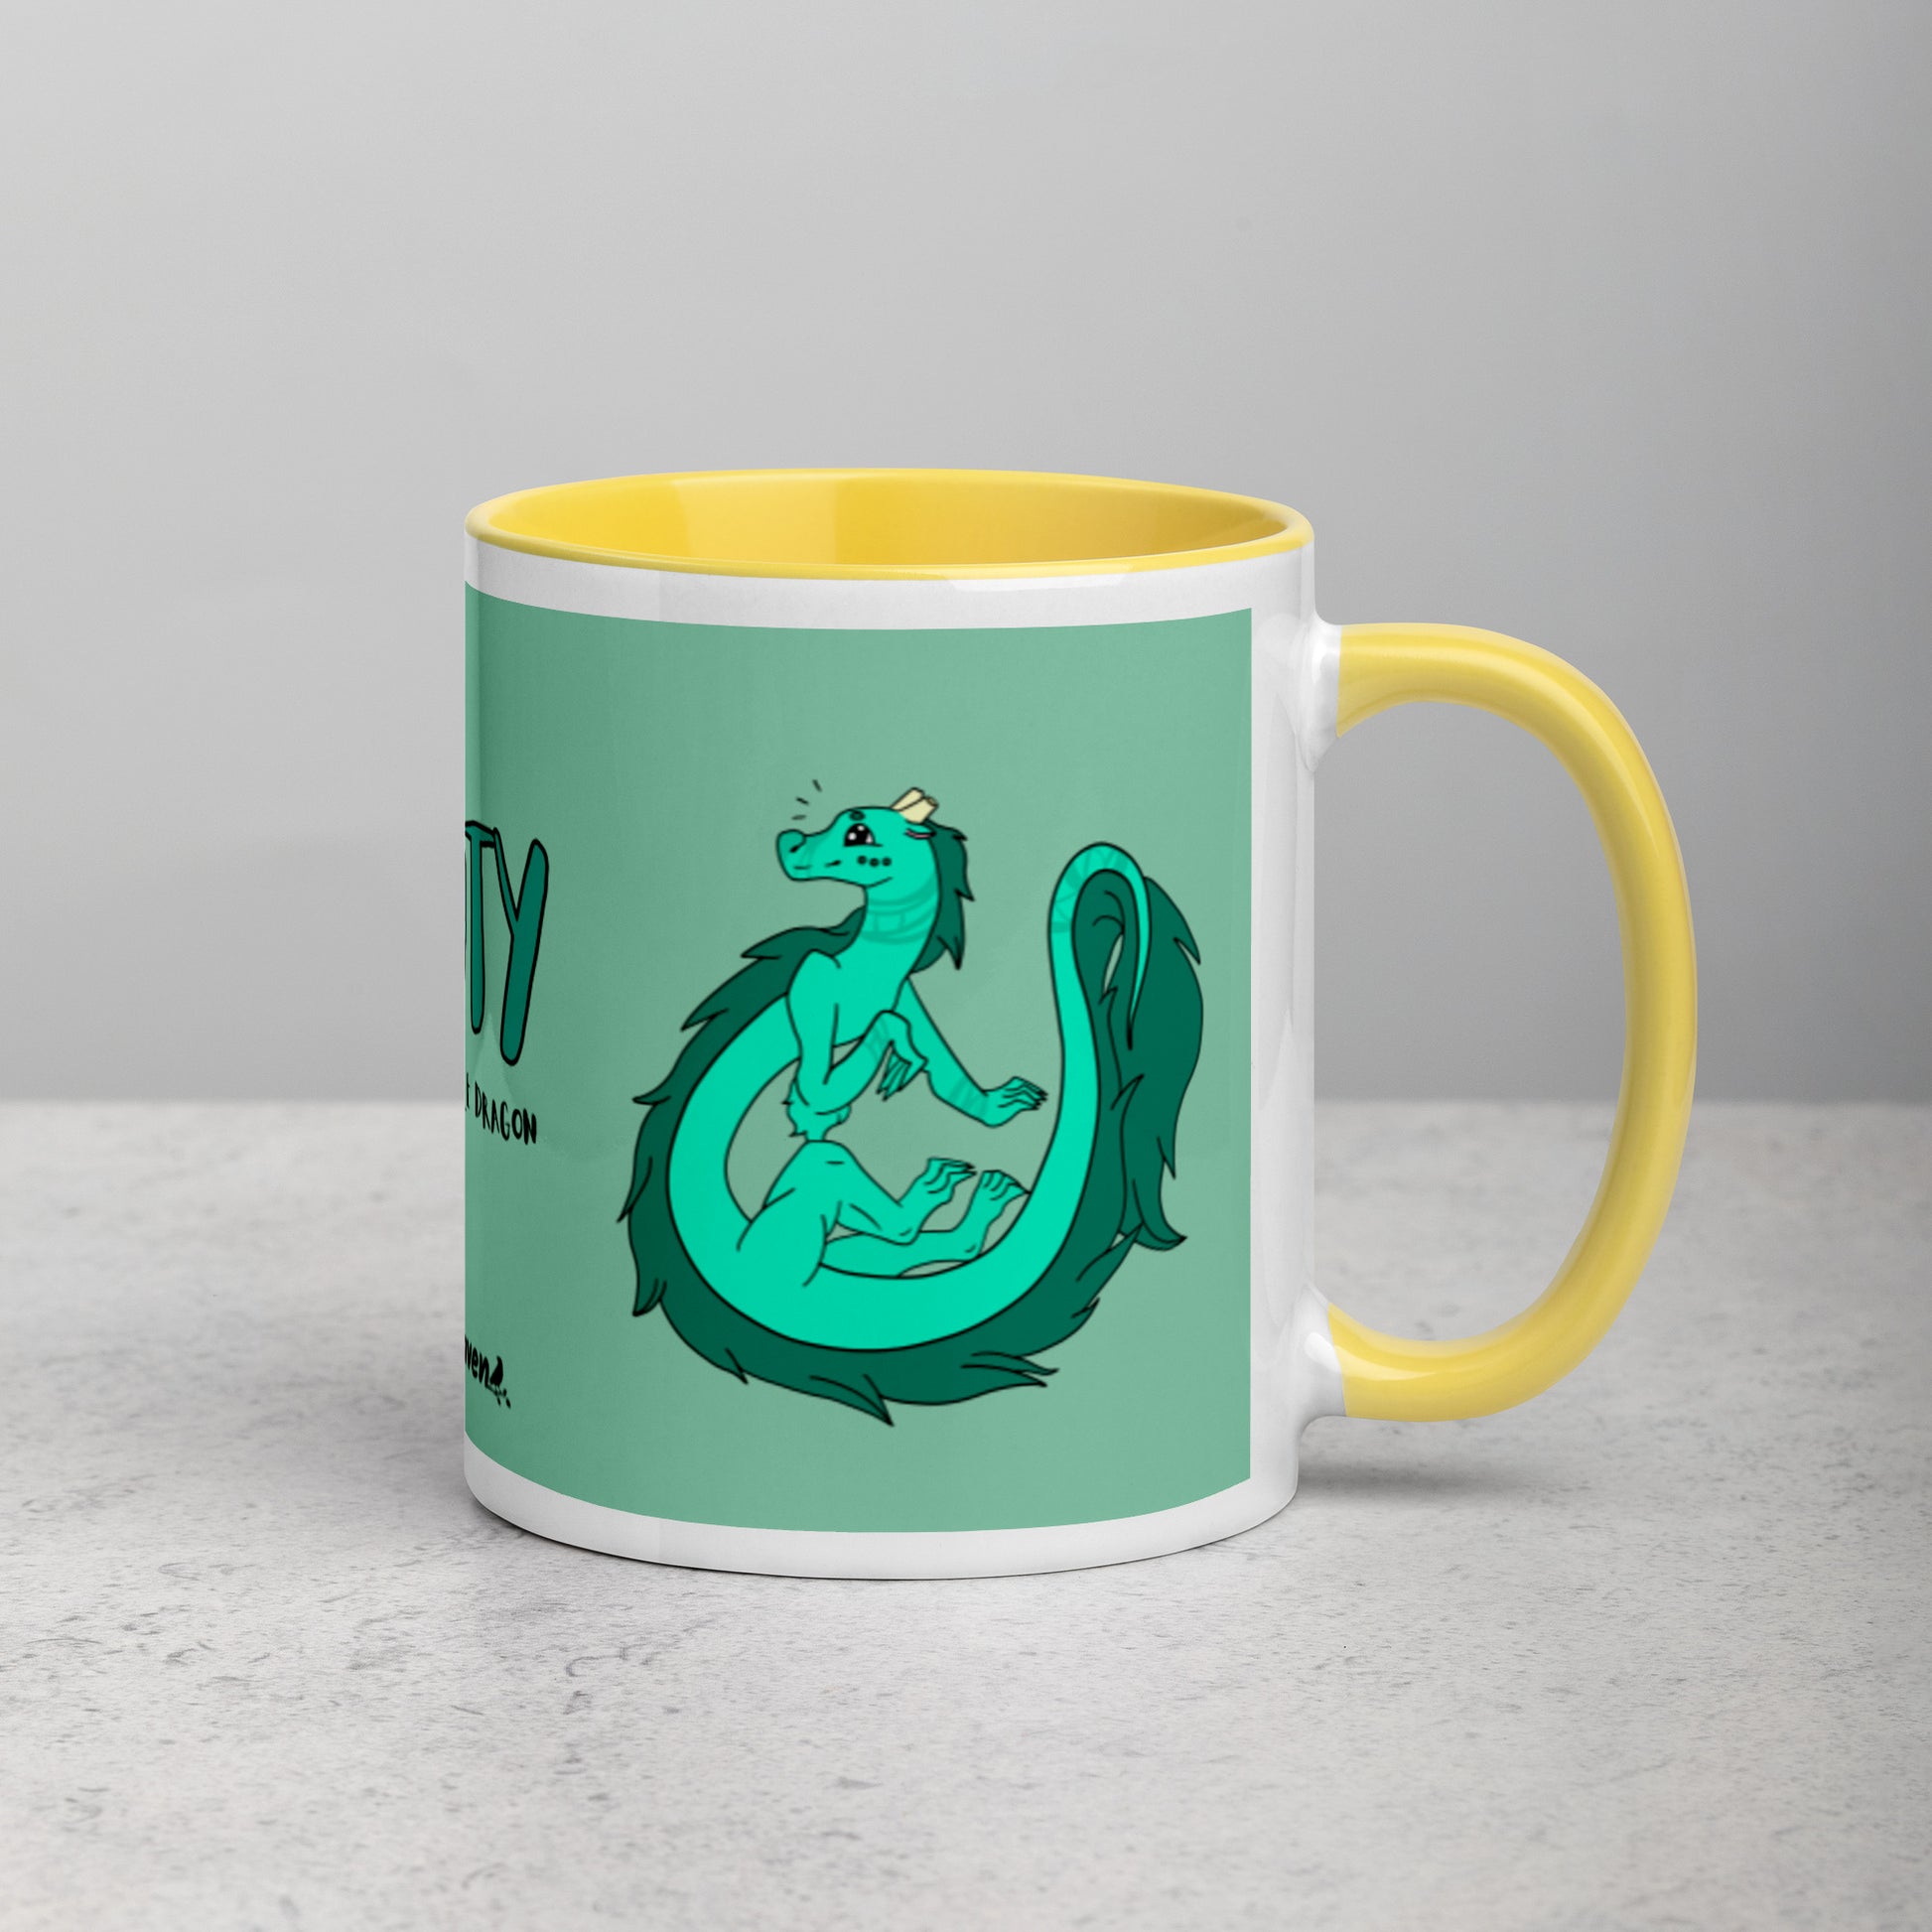 11 ounce white ceramic mug. Yellow inside and handle. Features double-sided image of Minty the Fuzzy Noodle Dragon on a green background. Shown on tabletop with handle facing right.